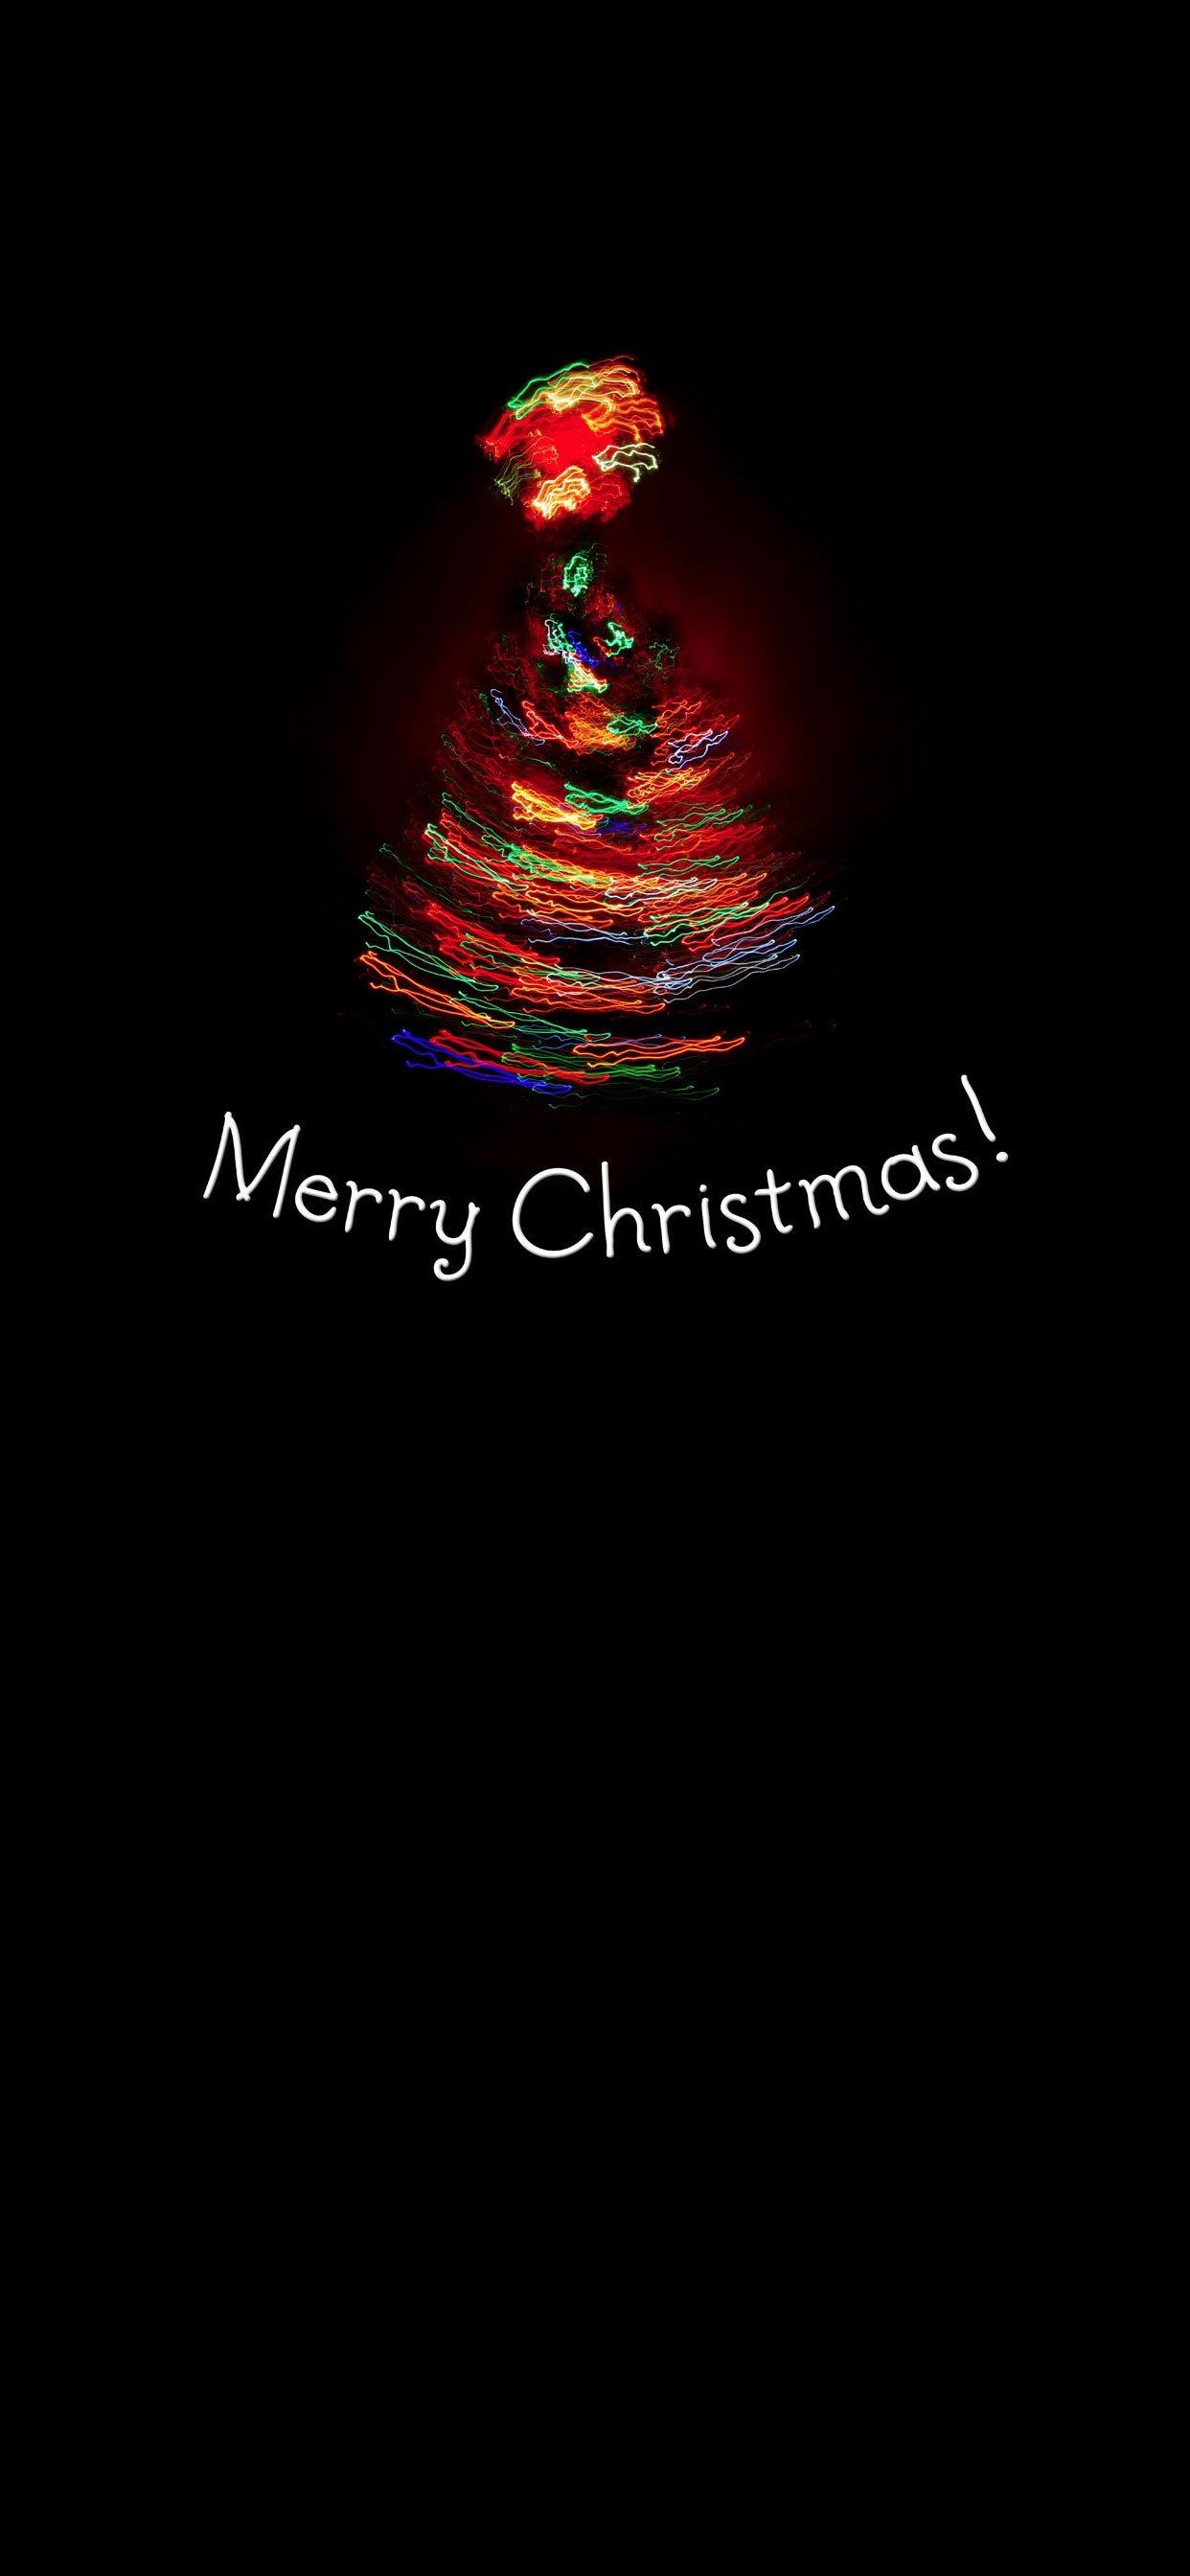 iPhone 11 Pro Max Christmas Wallpapers